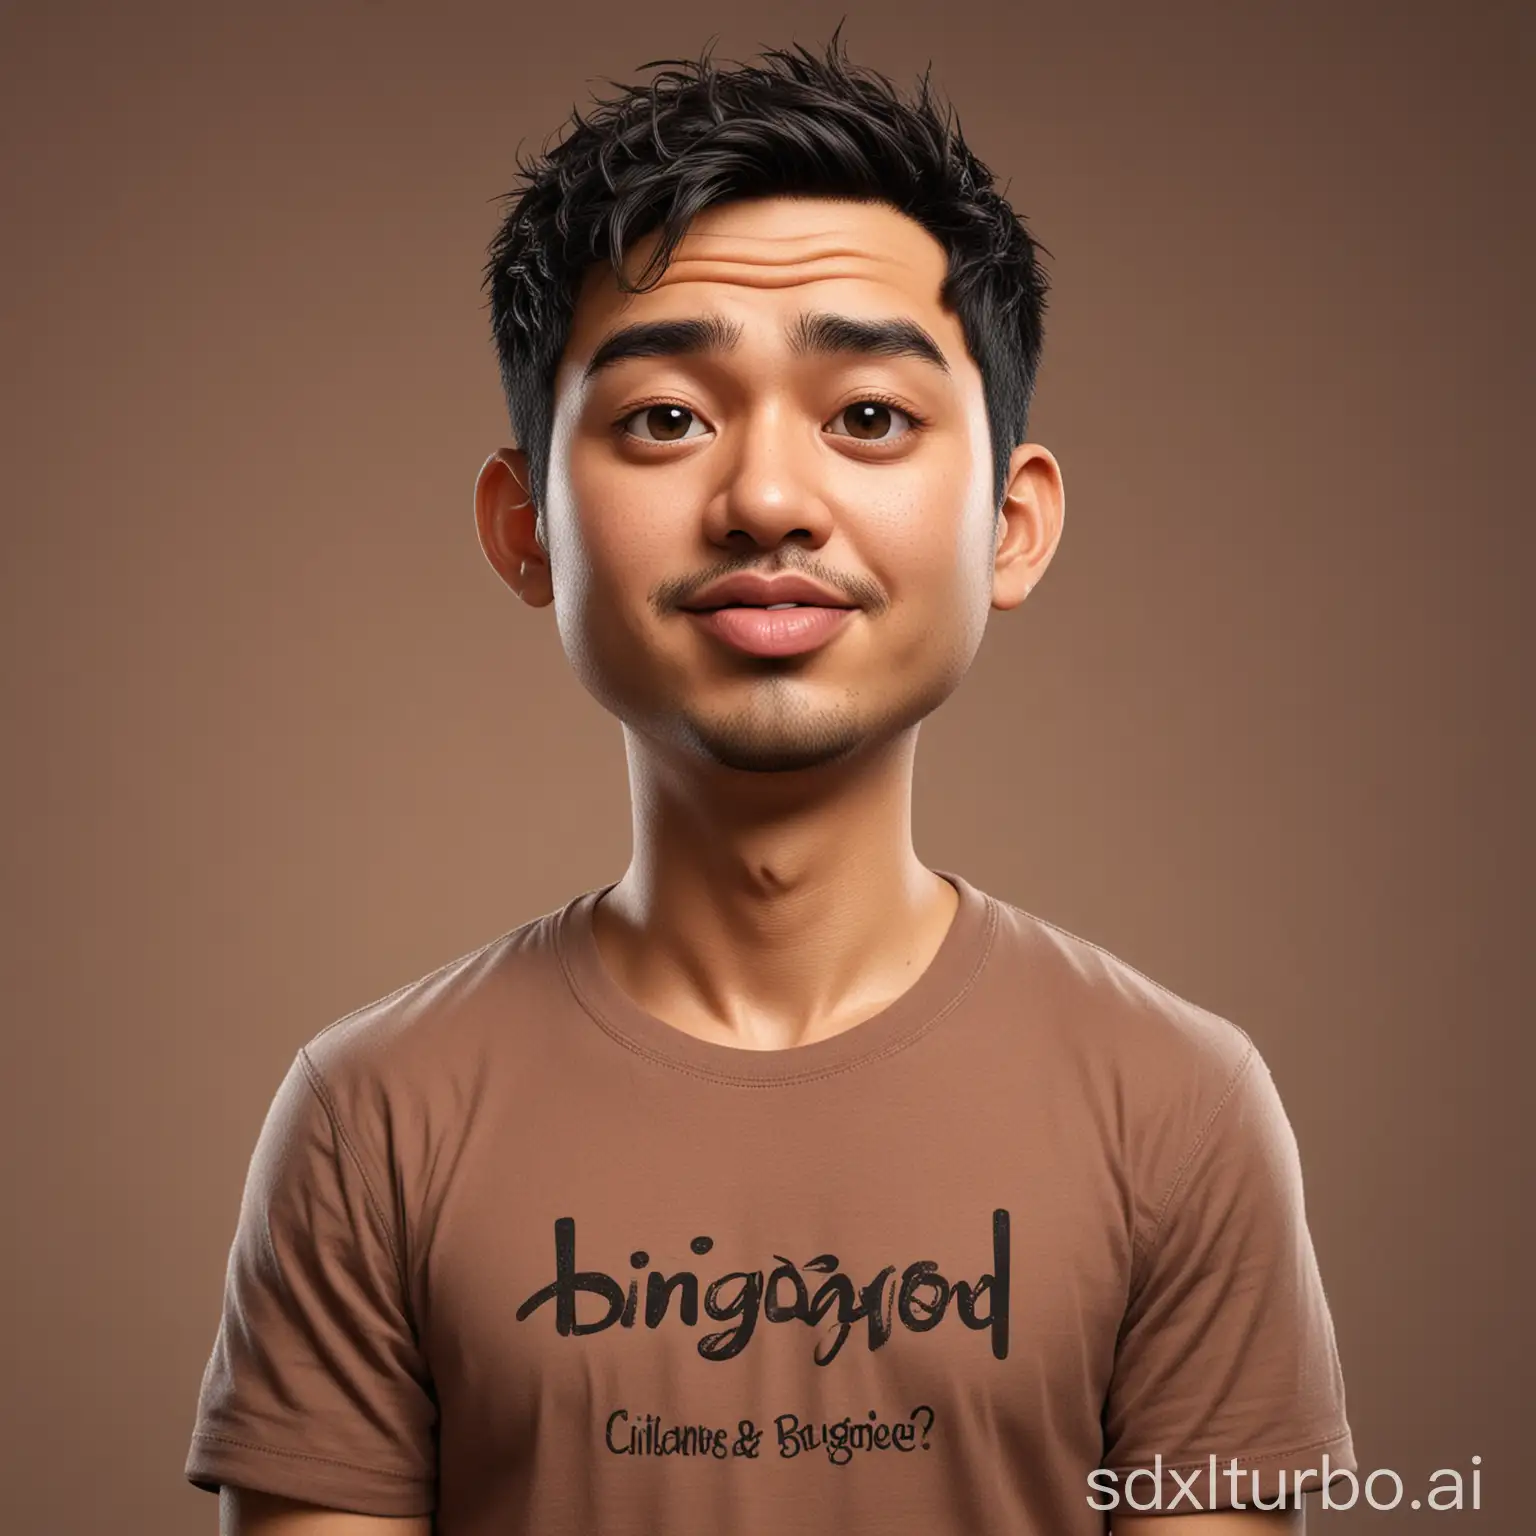 Confused-Asian-Man-Cartoon-Character-with-Puppy-and-BINGUNG-Text-on-TShirt